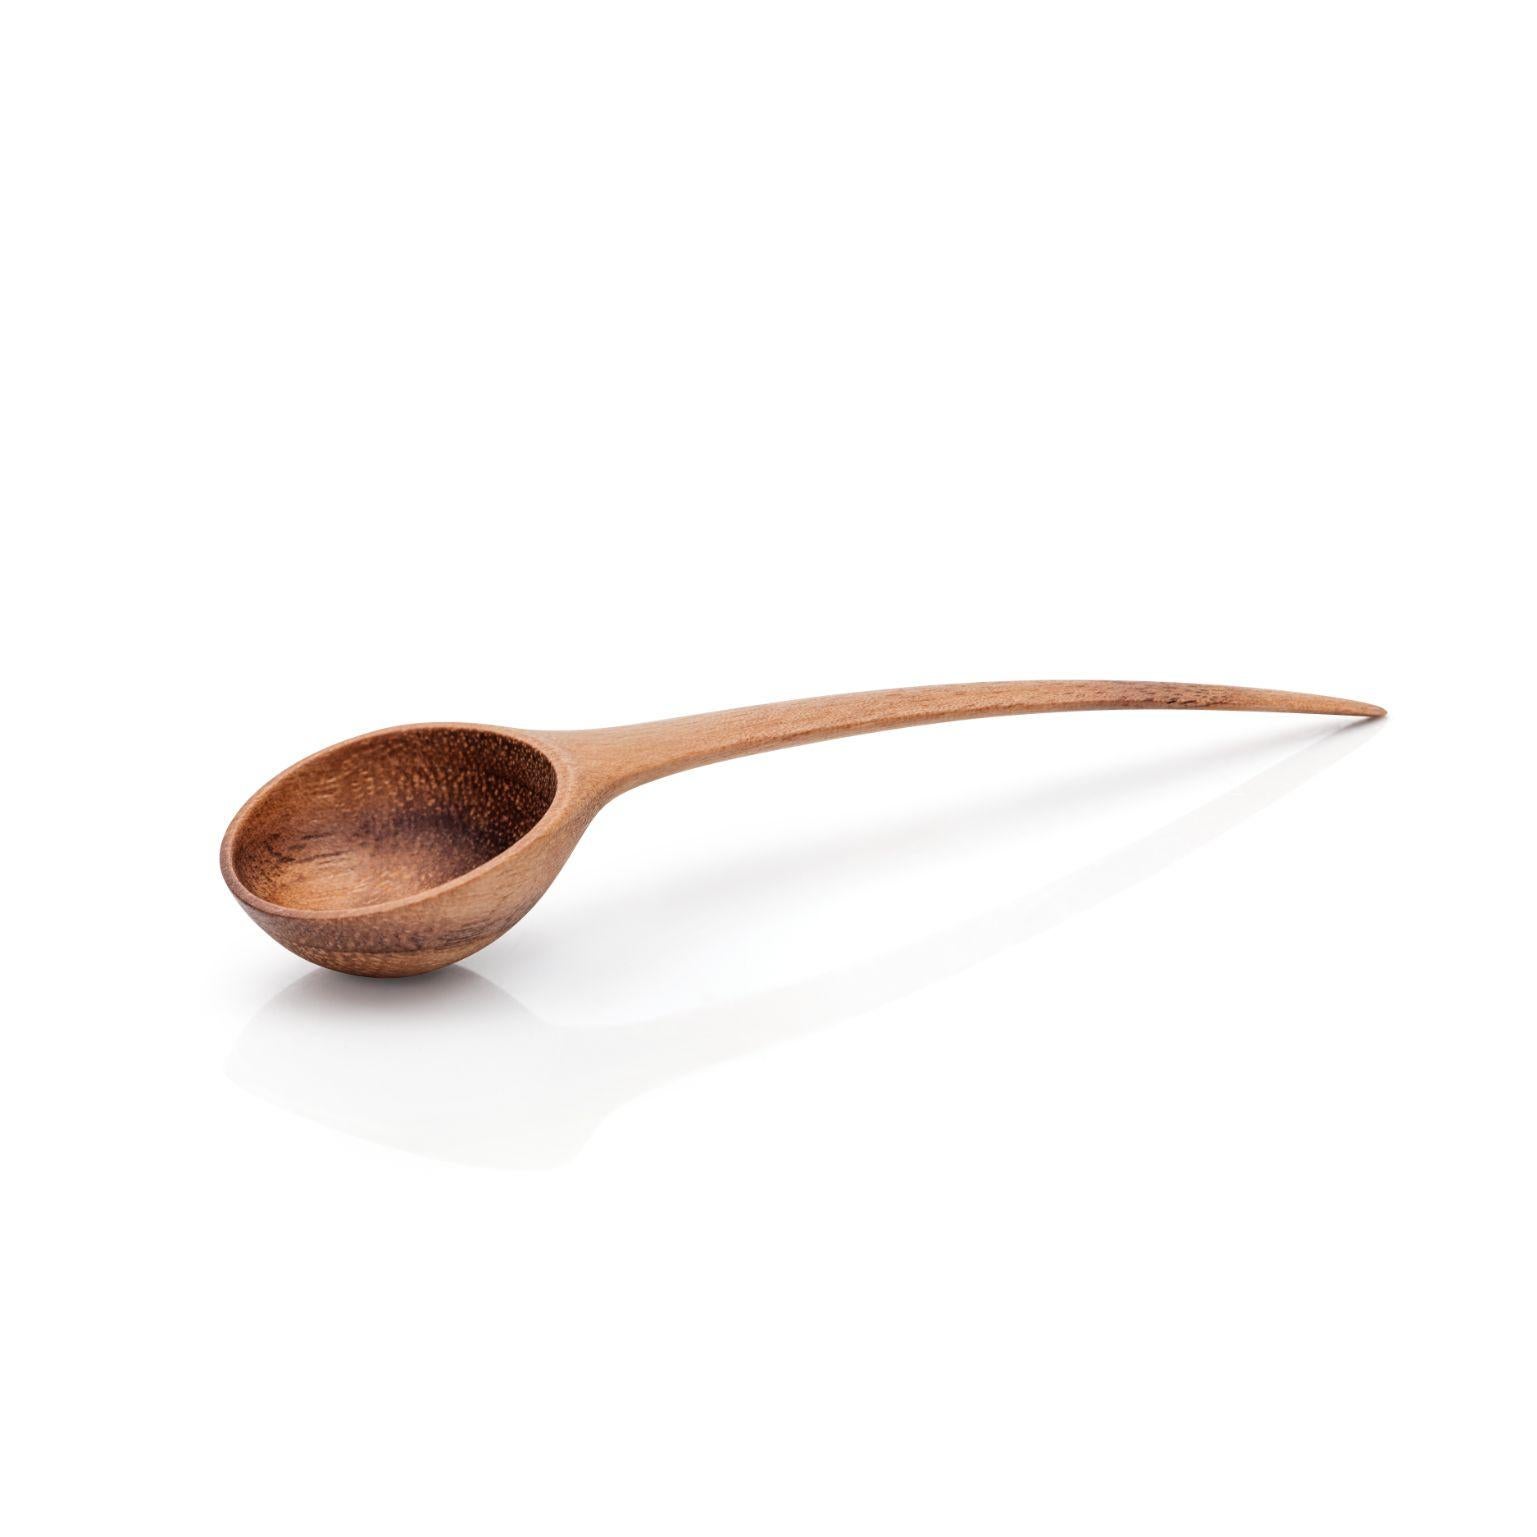 Large Pisara spoon by Antrei Hartikainen
Materials: Walnut, maple, natural oil wax
Dimensions: W 7-10 cm

Also available in three sizes and a variety of woods

This range of small spoons are ideal for serving sugar, salt and other condiments. In